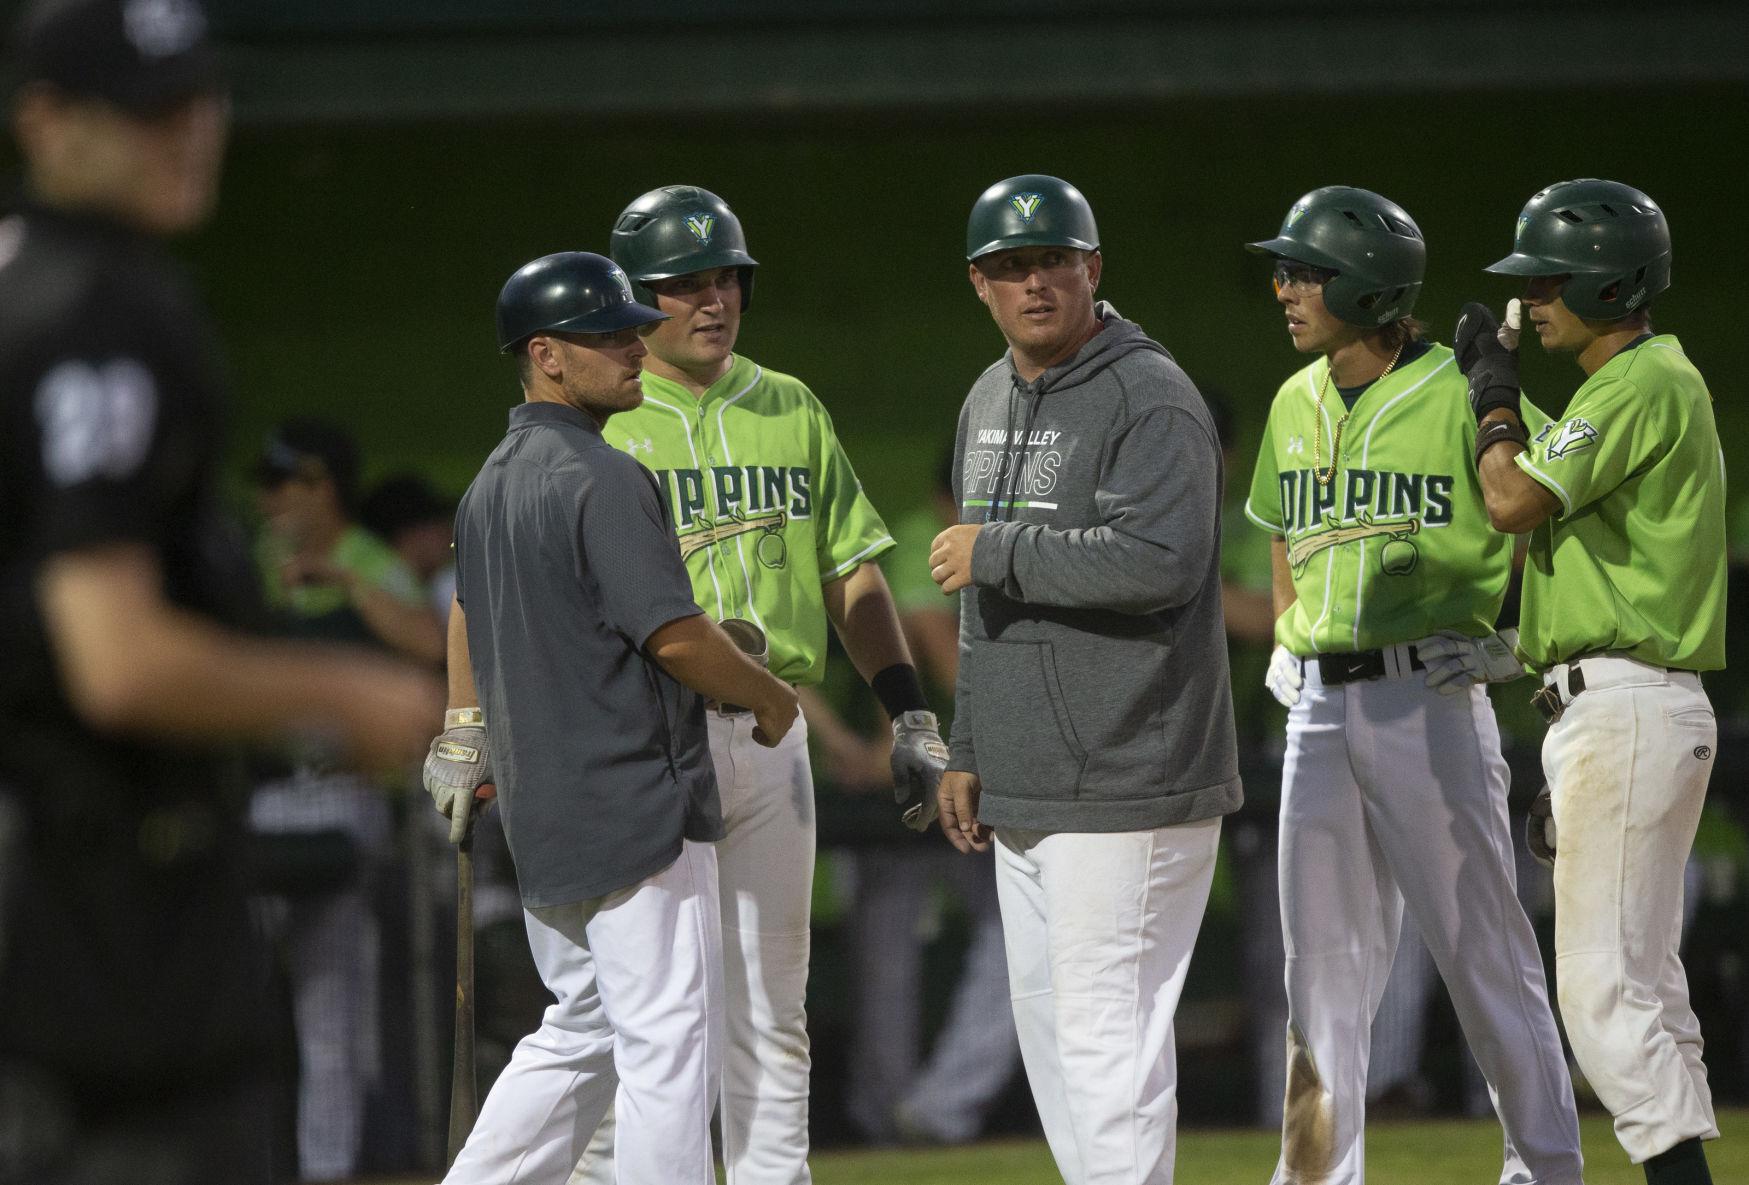 Pair of Oregon Ducks Join Pippins Roster - Pippins Baseball